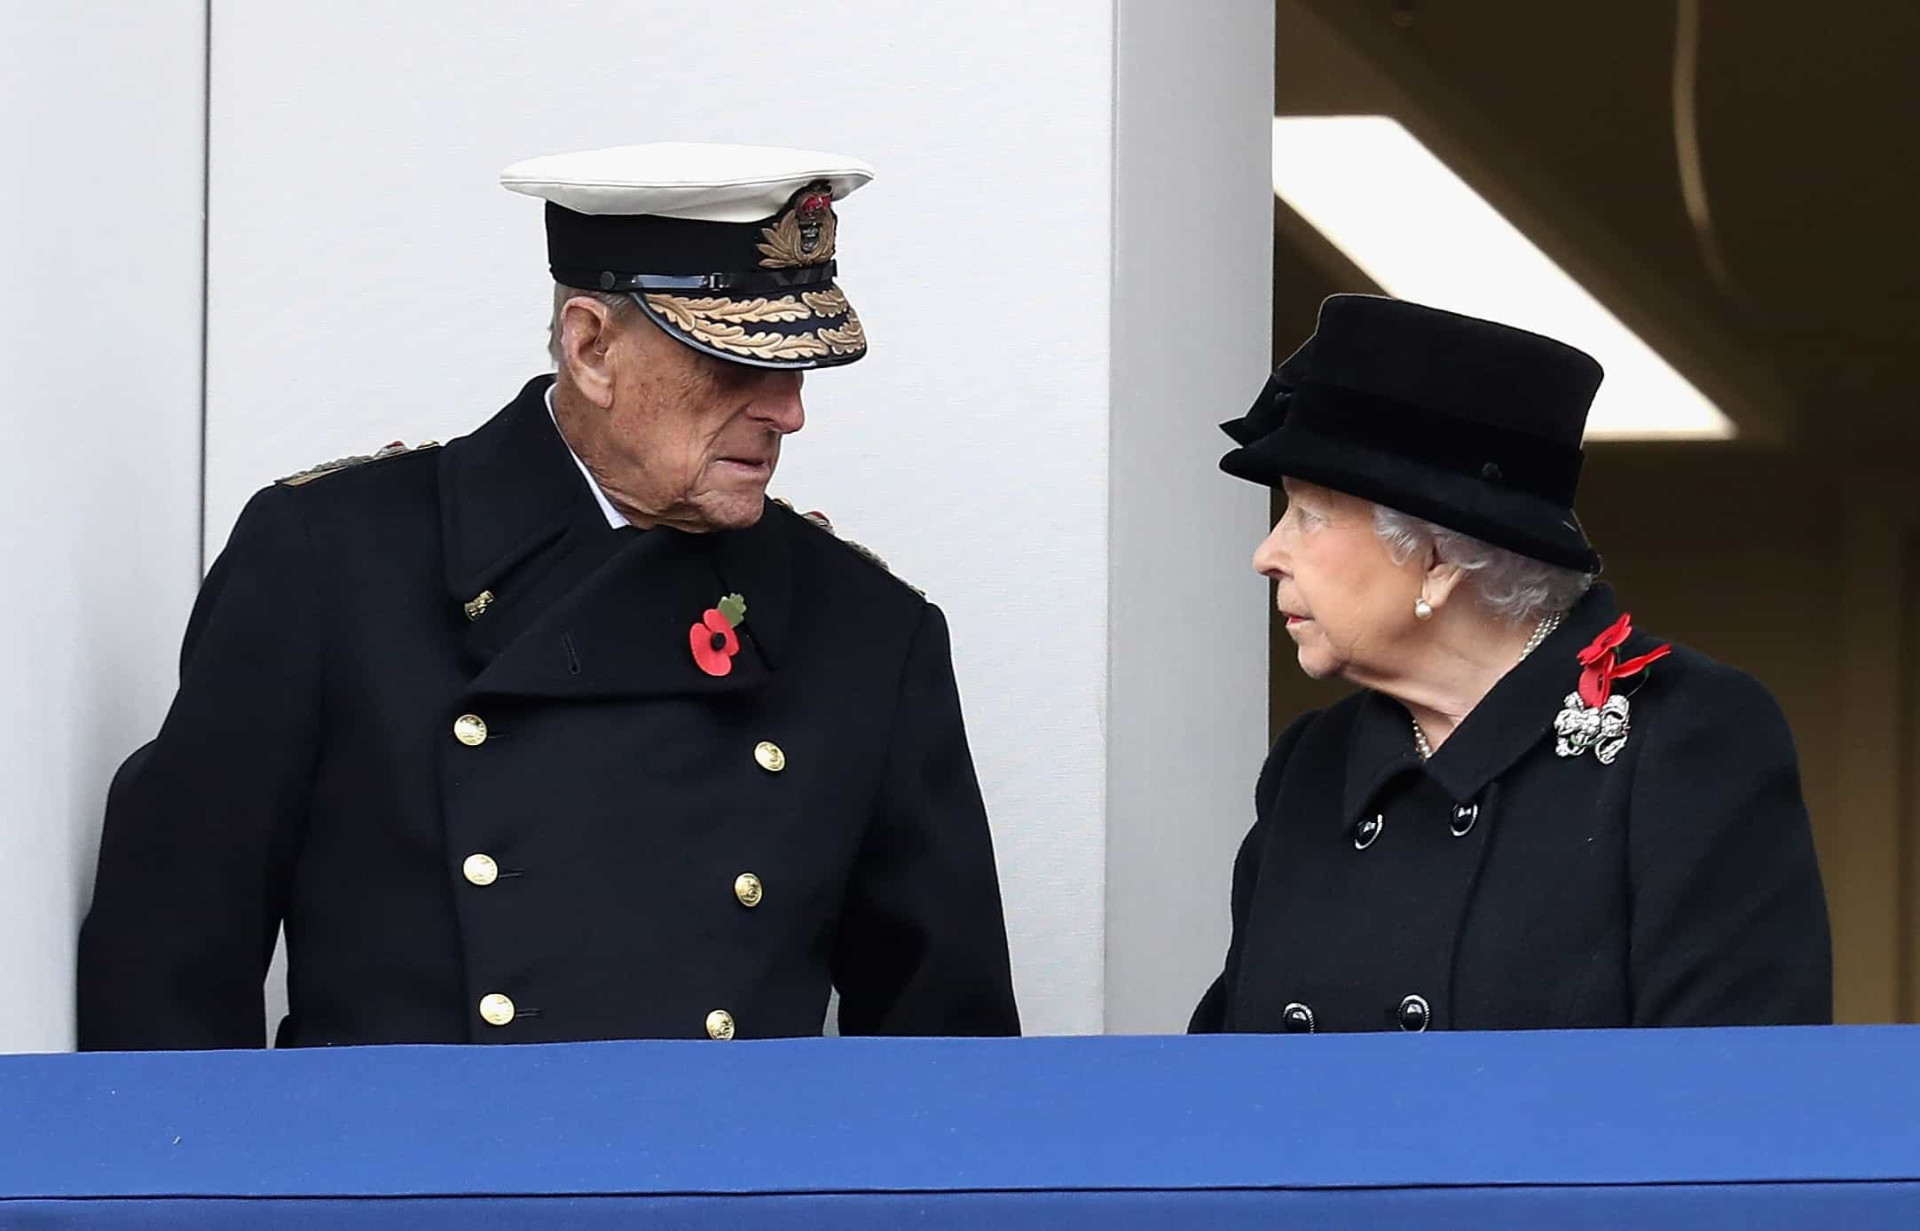 Prince Philip, Duke of Edinburgh and Queen Elizabeth II at the Remembrance Sunday memorial near The Cenotaph in London.<p>You may also like:<a href="https://www.starsinsider.com/n/477476?utm_source=msn.com&utm_medium=display&utm_campaign=referral_description&utm_content=202921v11en-nz"> Western celebrities born or raised in India</a></p>